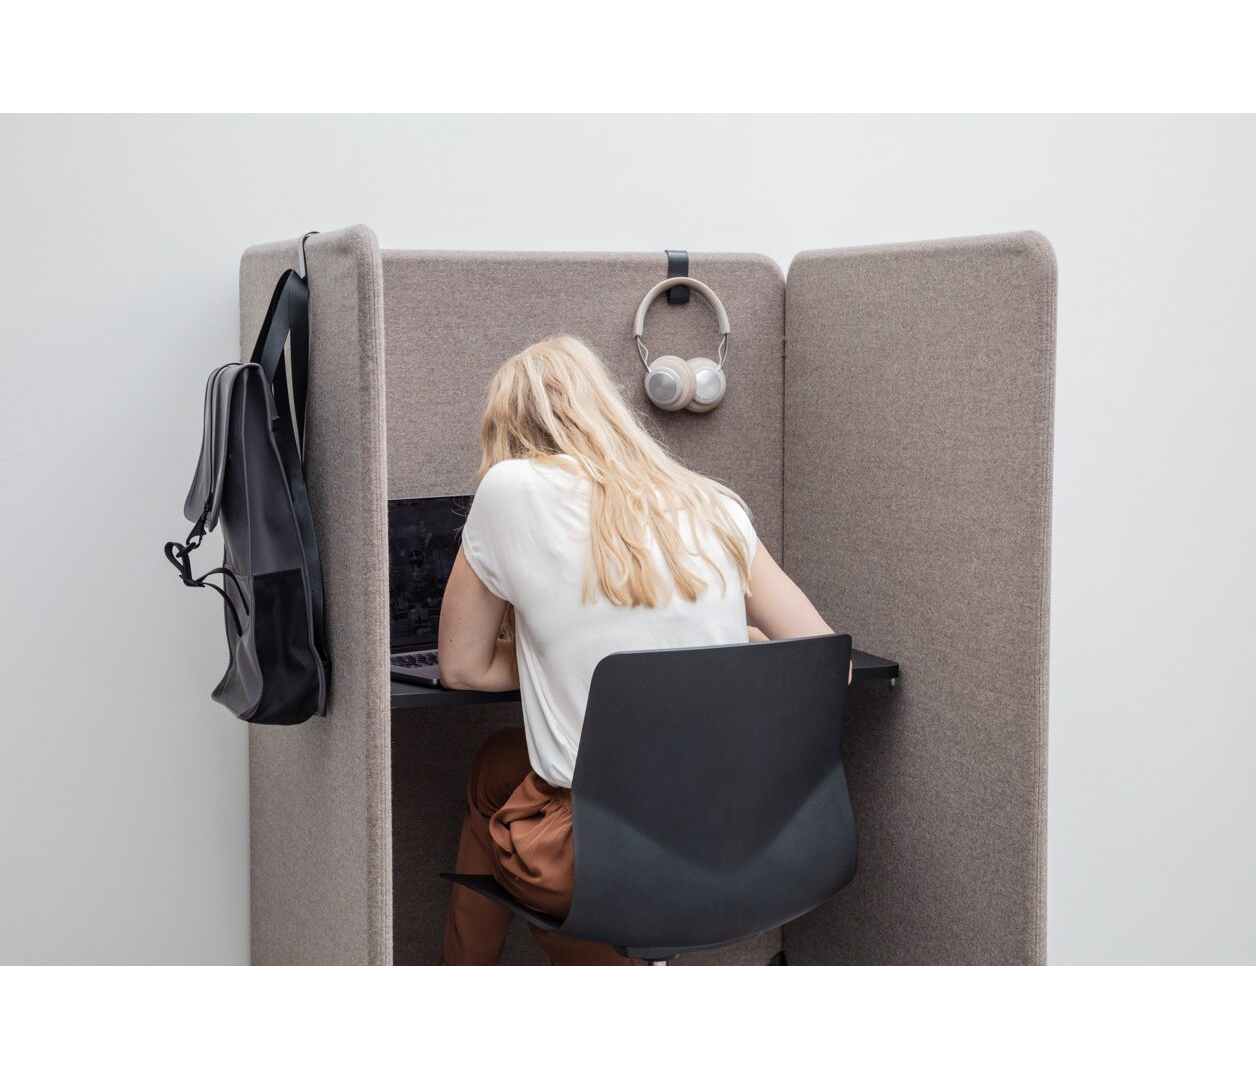 OCEE&FOUR – Work & Study Booths – FourPeople Study Booth – Lifestyle Image 3 Large